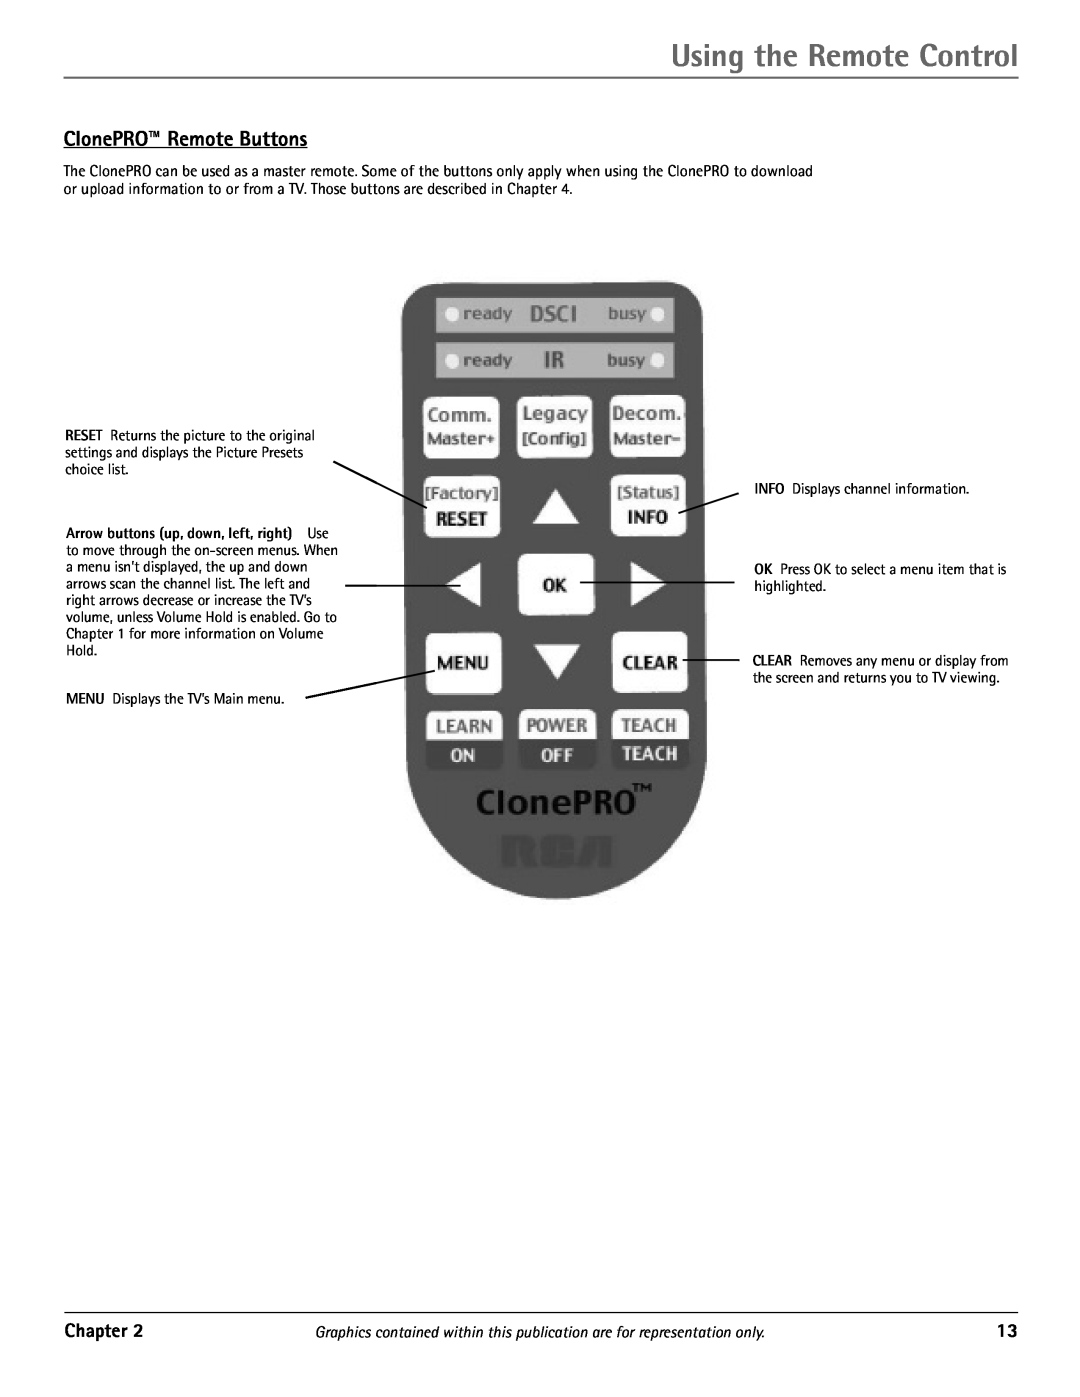 RCA J20542 manual ClonePRO Remote Buttons, Using the Remote Control, Chapter 